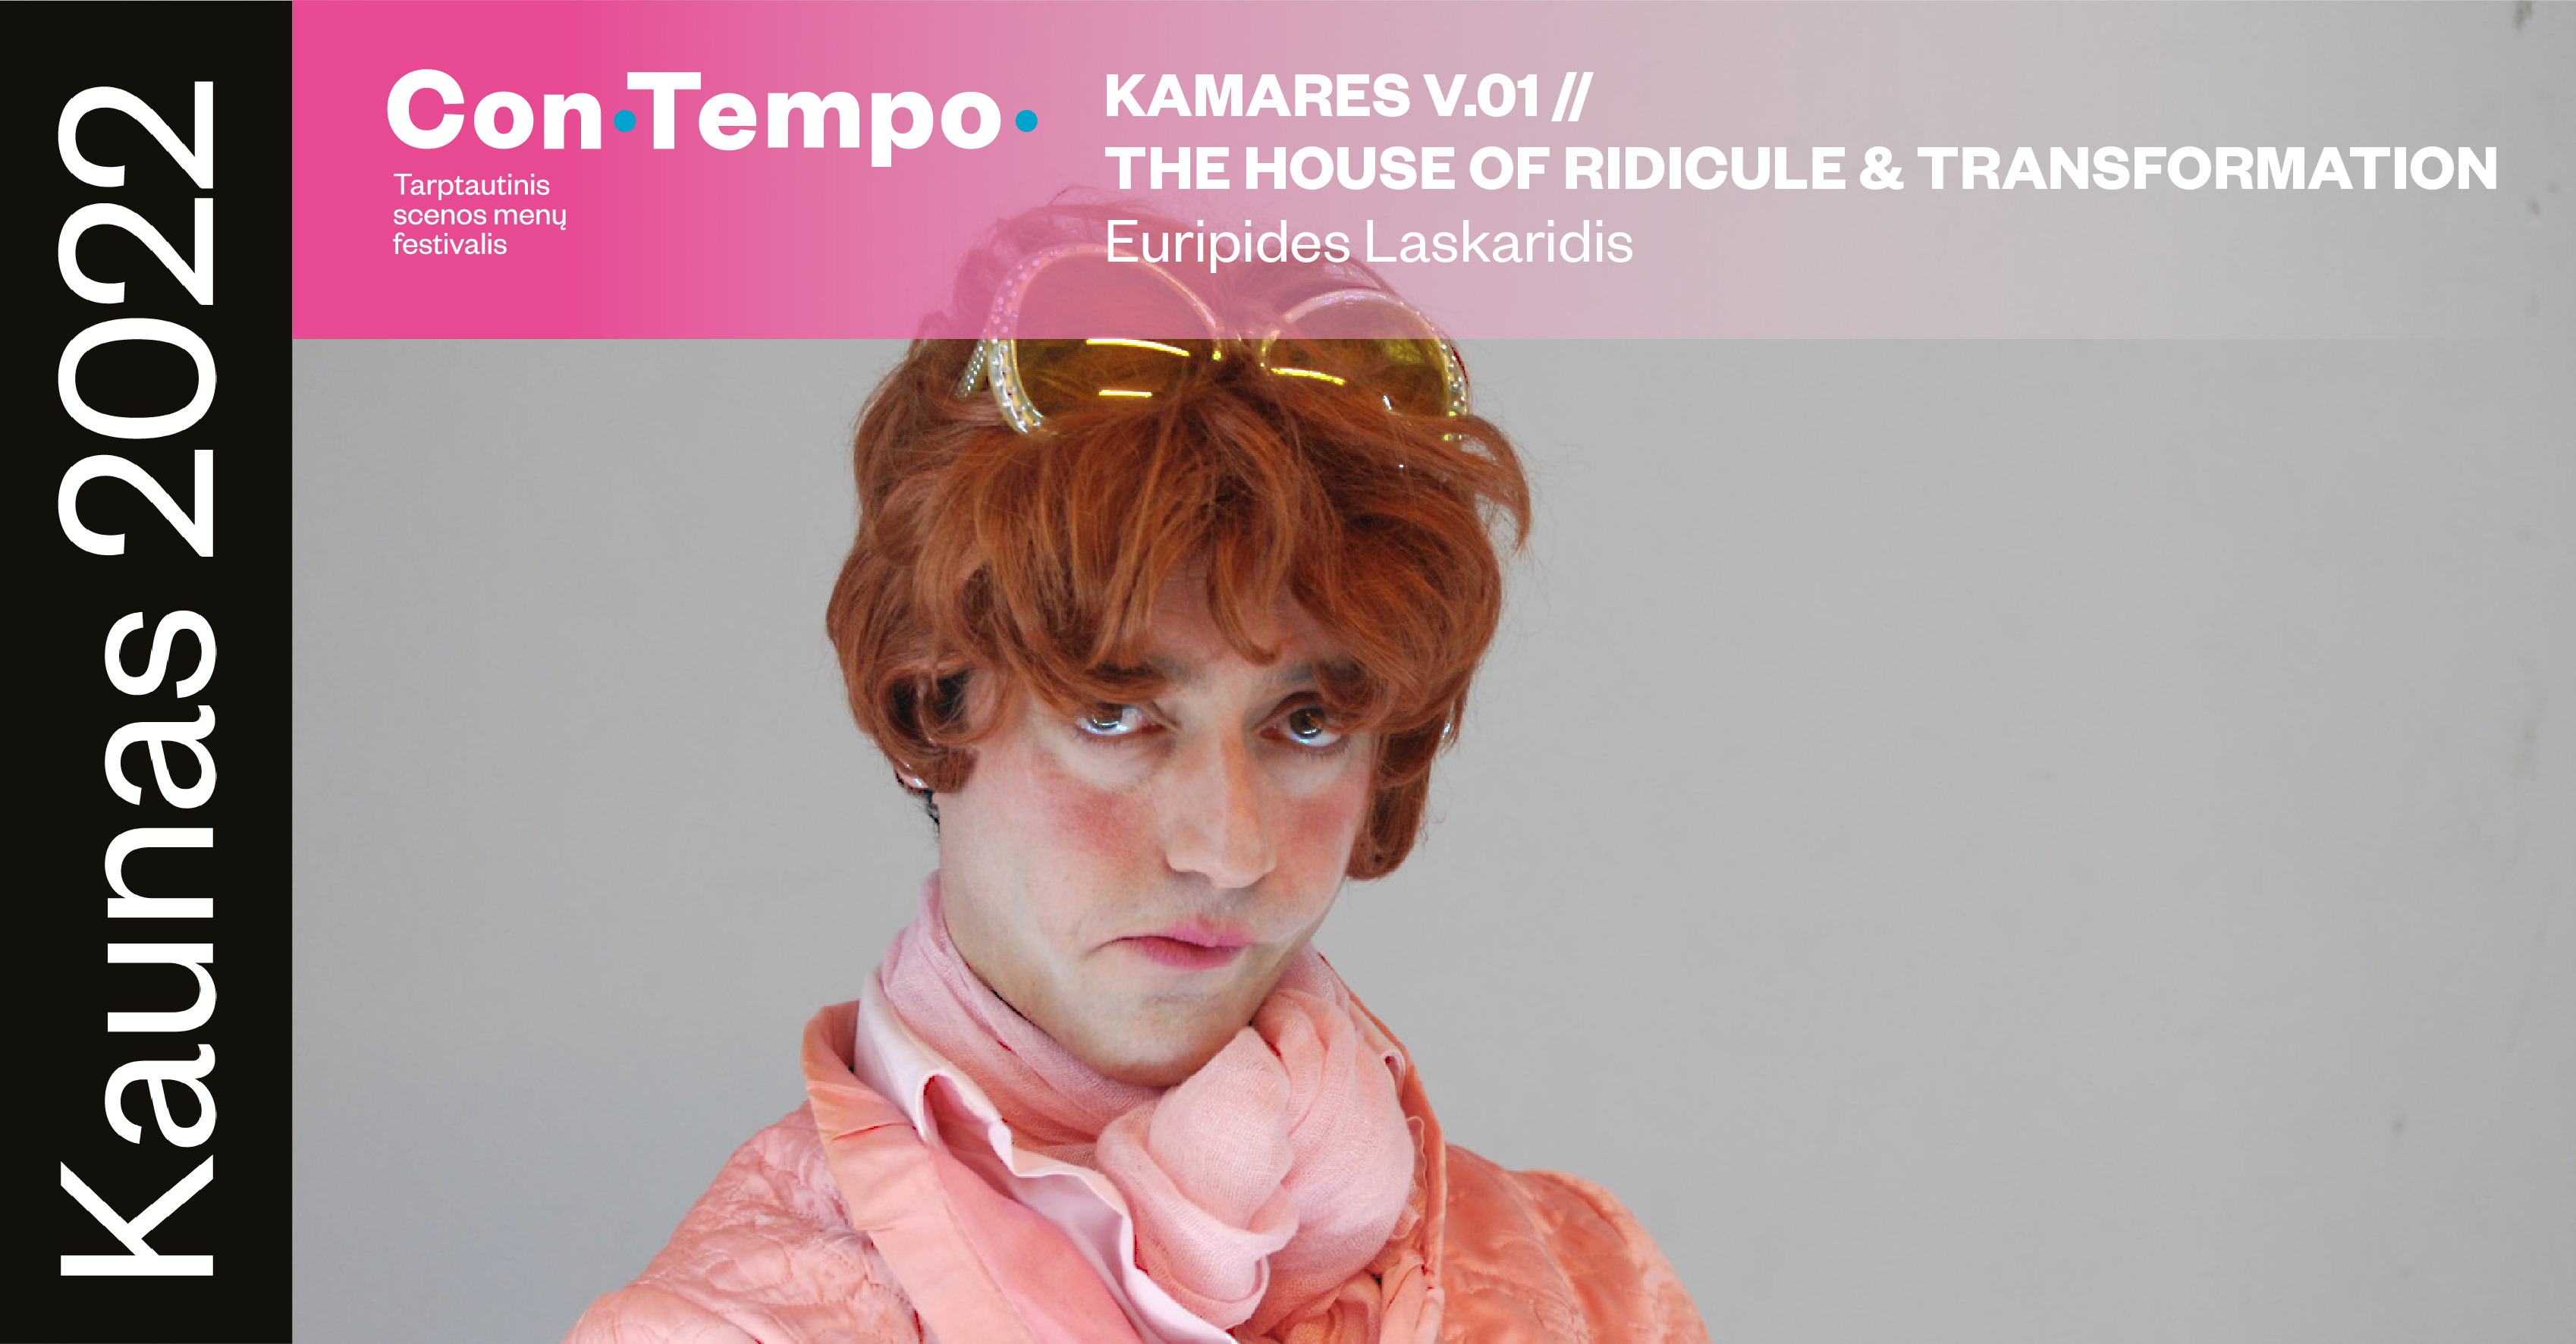 ConTempo 2022: Kamares v.01 / The House of Ridicule & Transformation